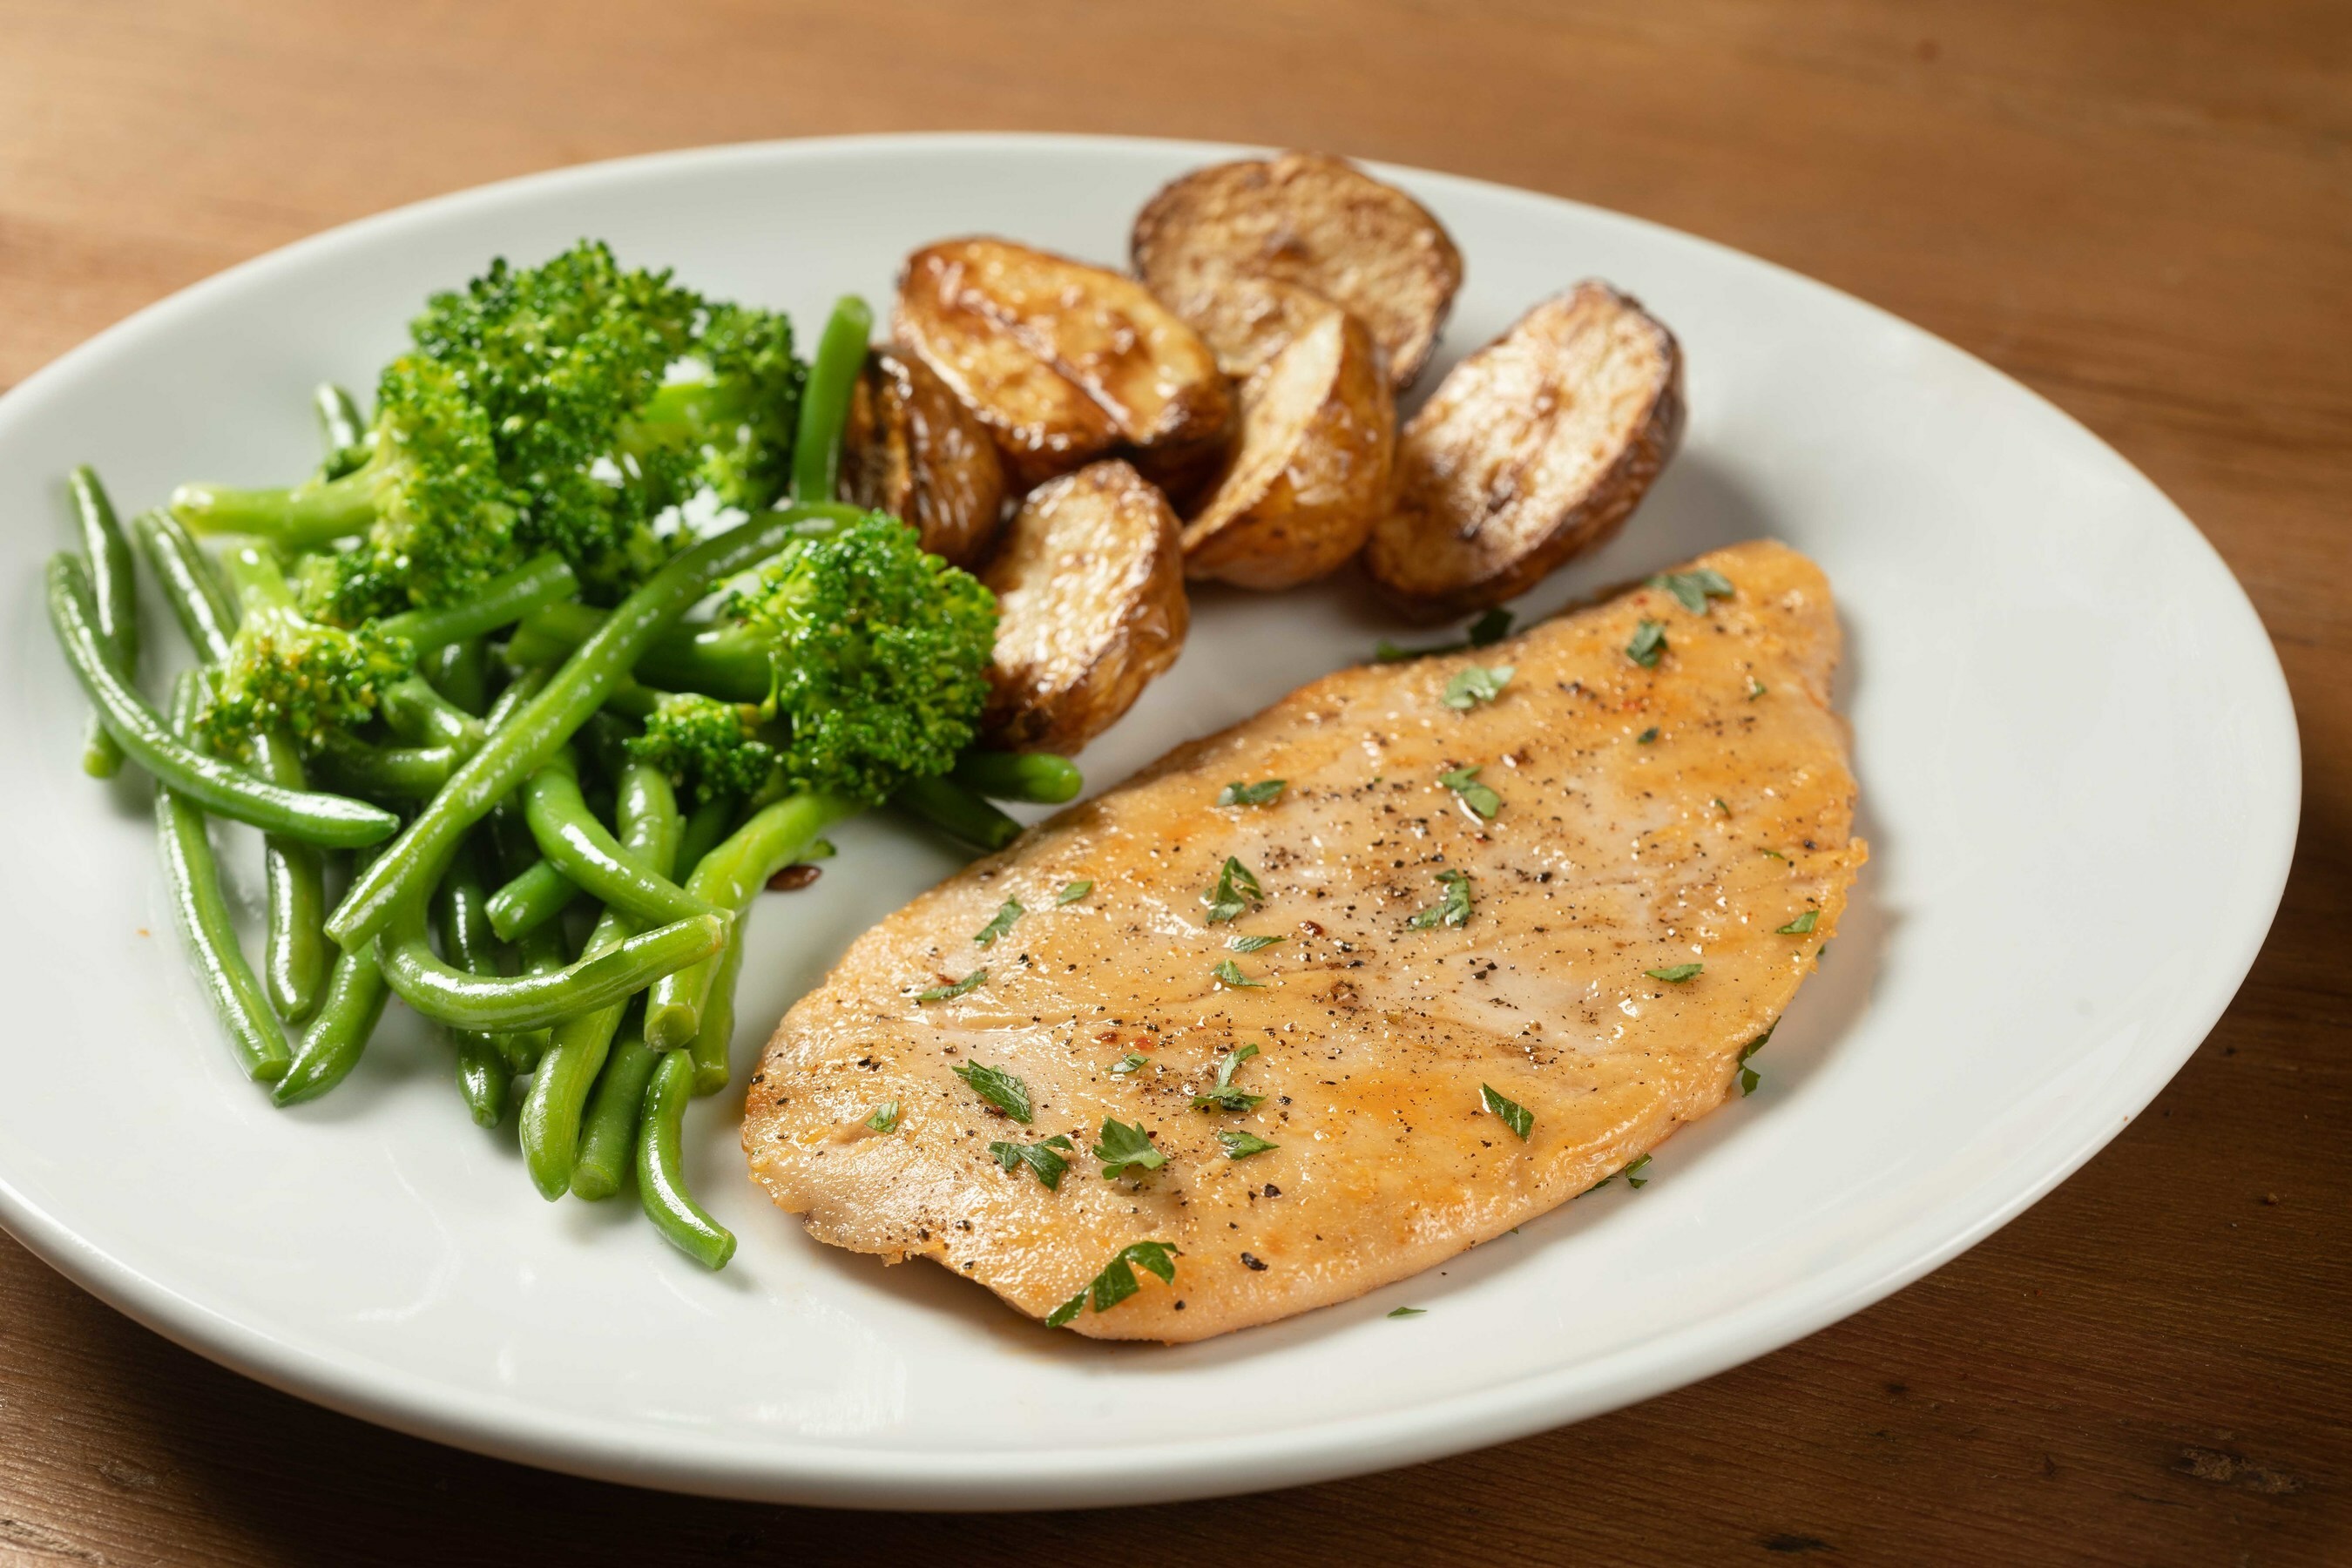 Future Meat can produce a cultivated chicken breast for just $7.70 per pound, or $1.70 per 110-gram chicken breast.